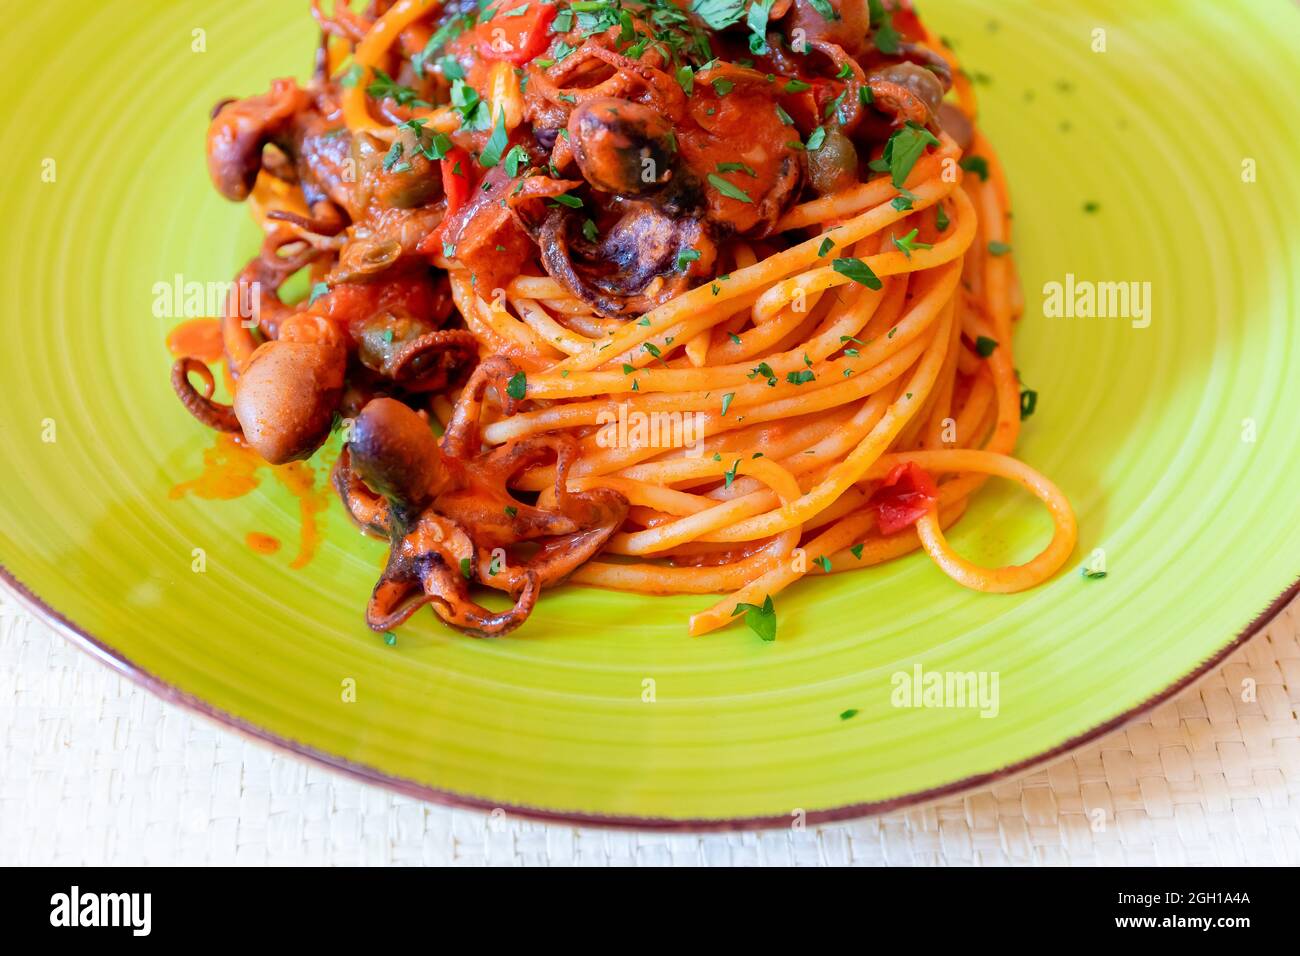 Spaghetti with octopus, tomato sauce, olives and capers. Typical recipe of Neapolitan cuisine, in Italy. Ready to eat. Stock Photo